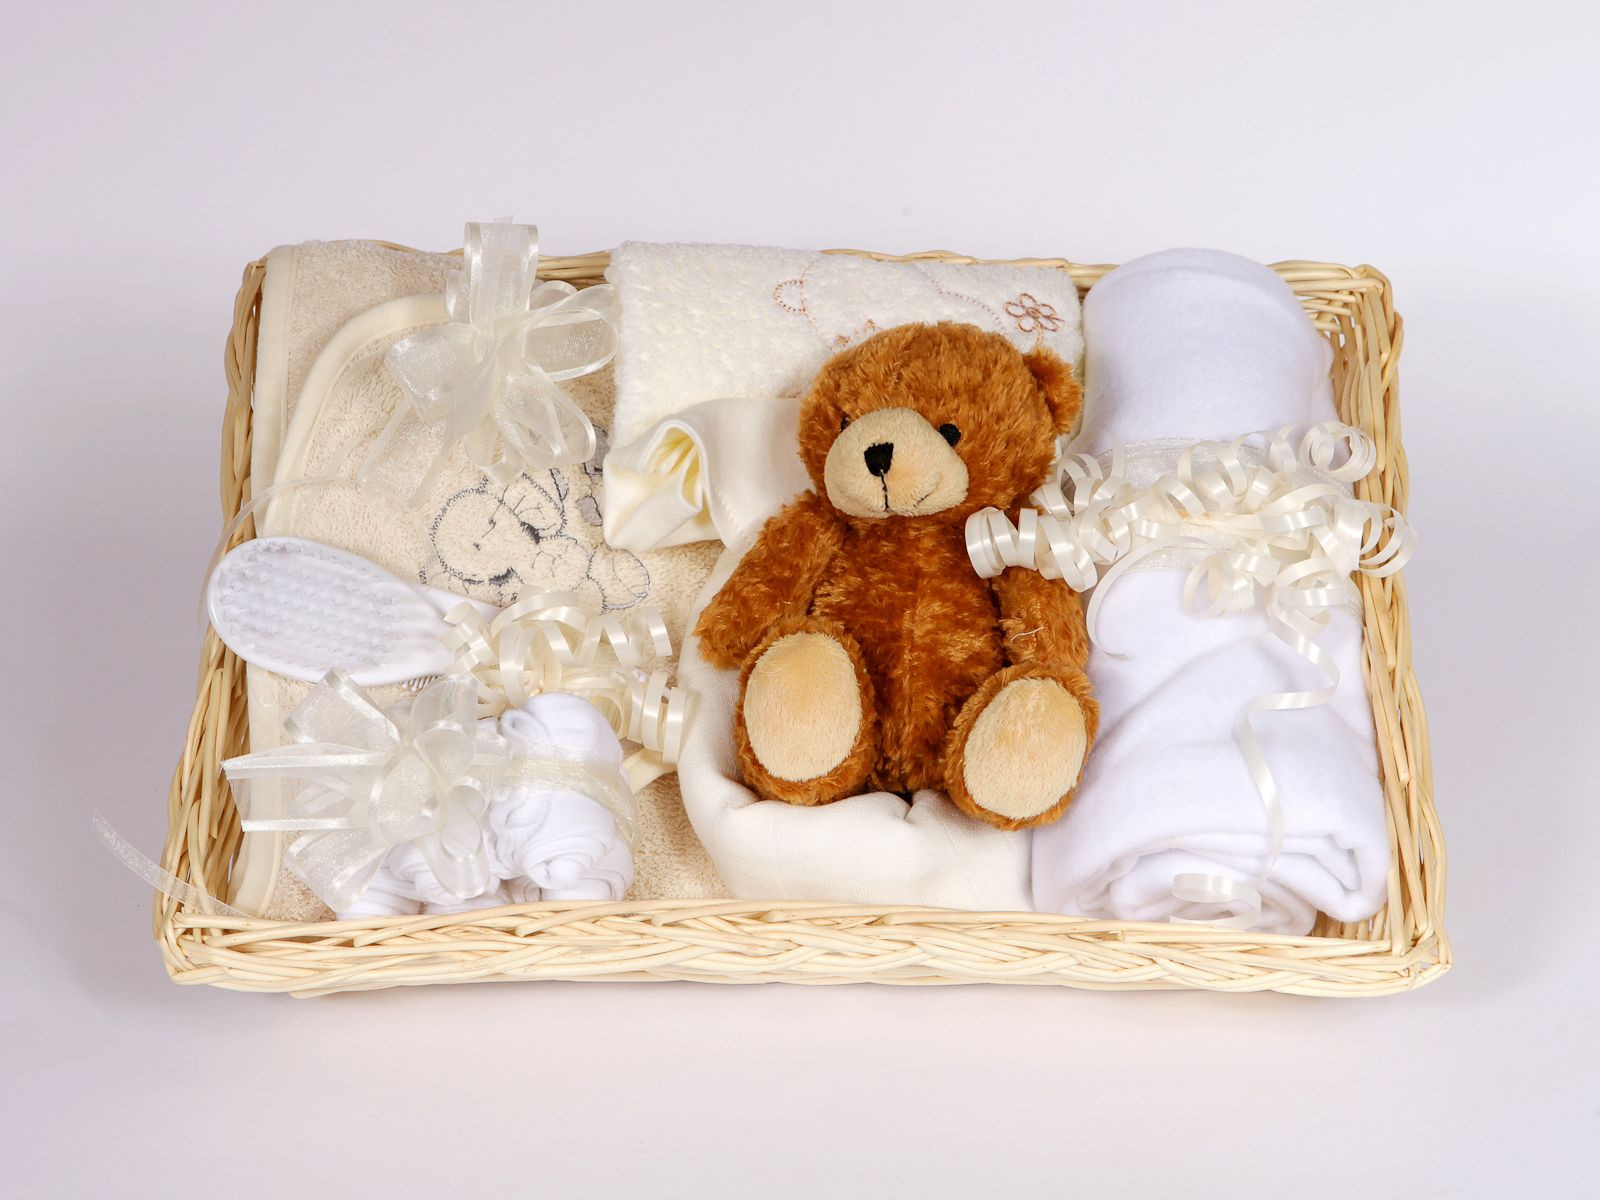 Essential Baby Shower Gifts
 Gift Wrapped Cream Ideal Baby Shower Hamper 12 Essential